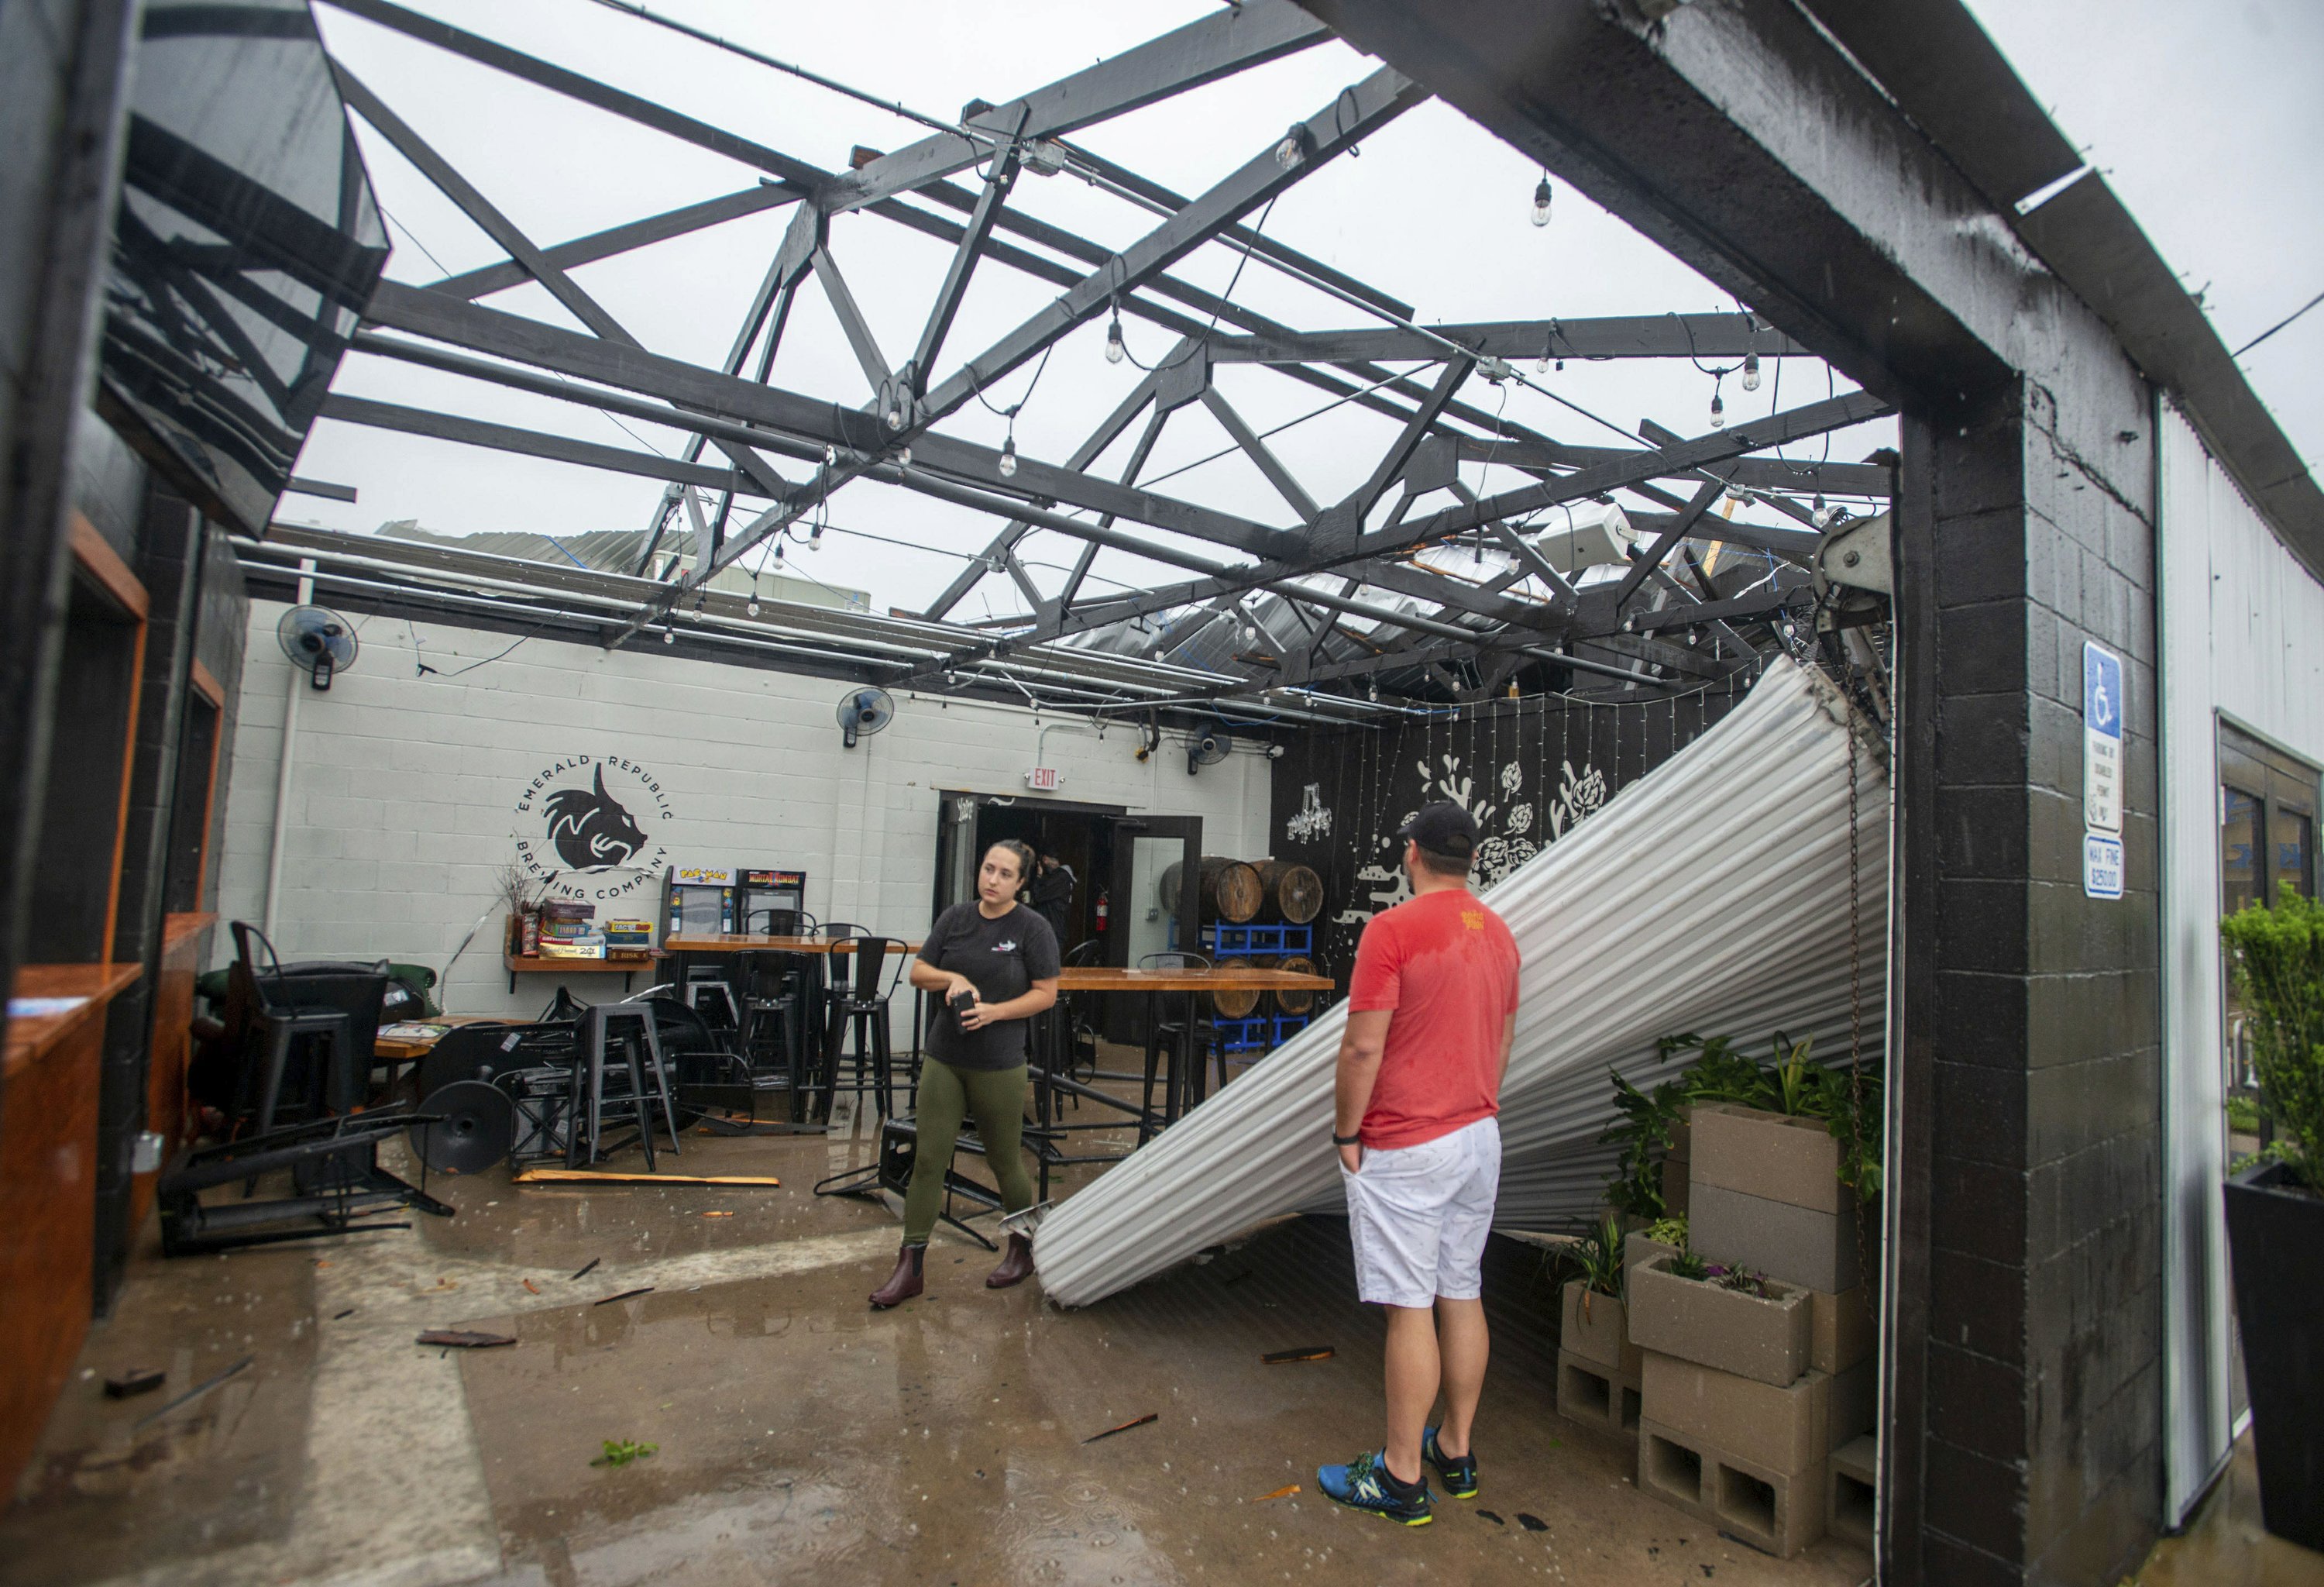 Severe storm damages buildings in Panhandle, Florida